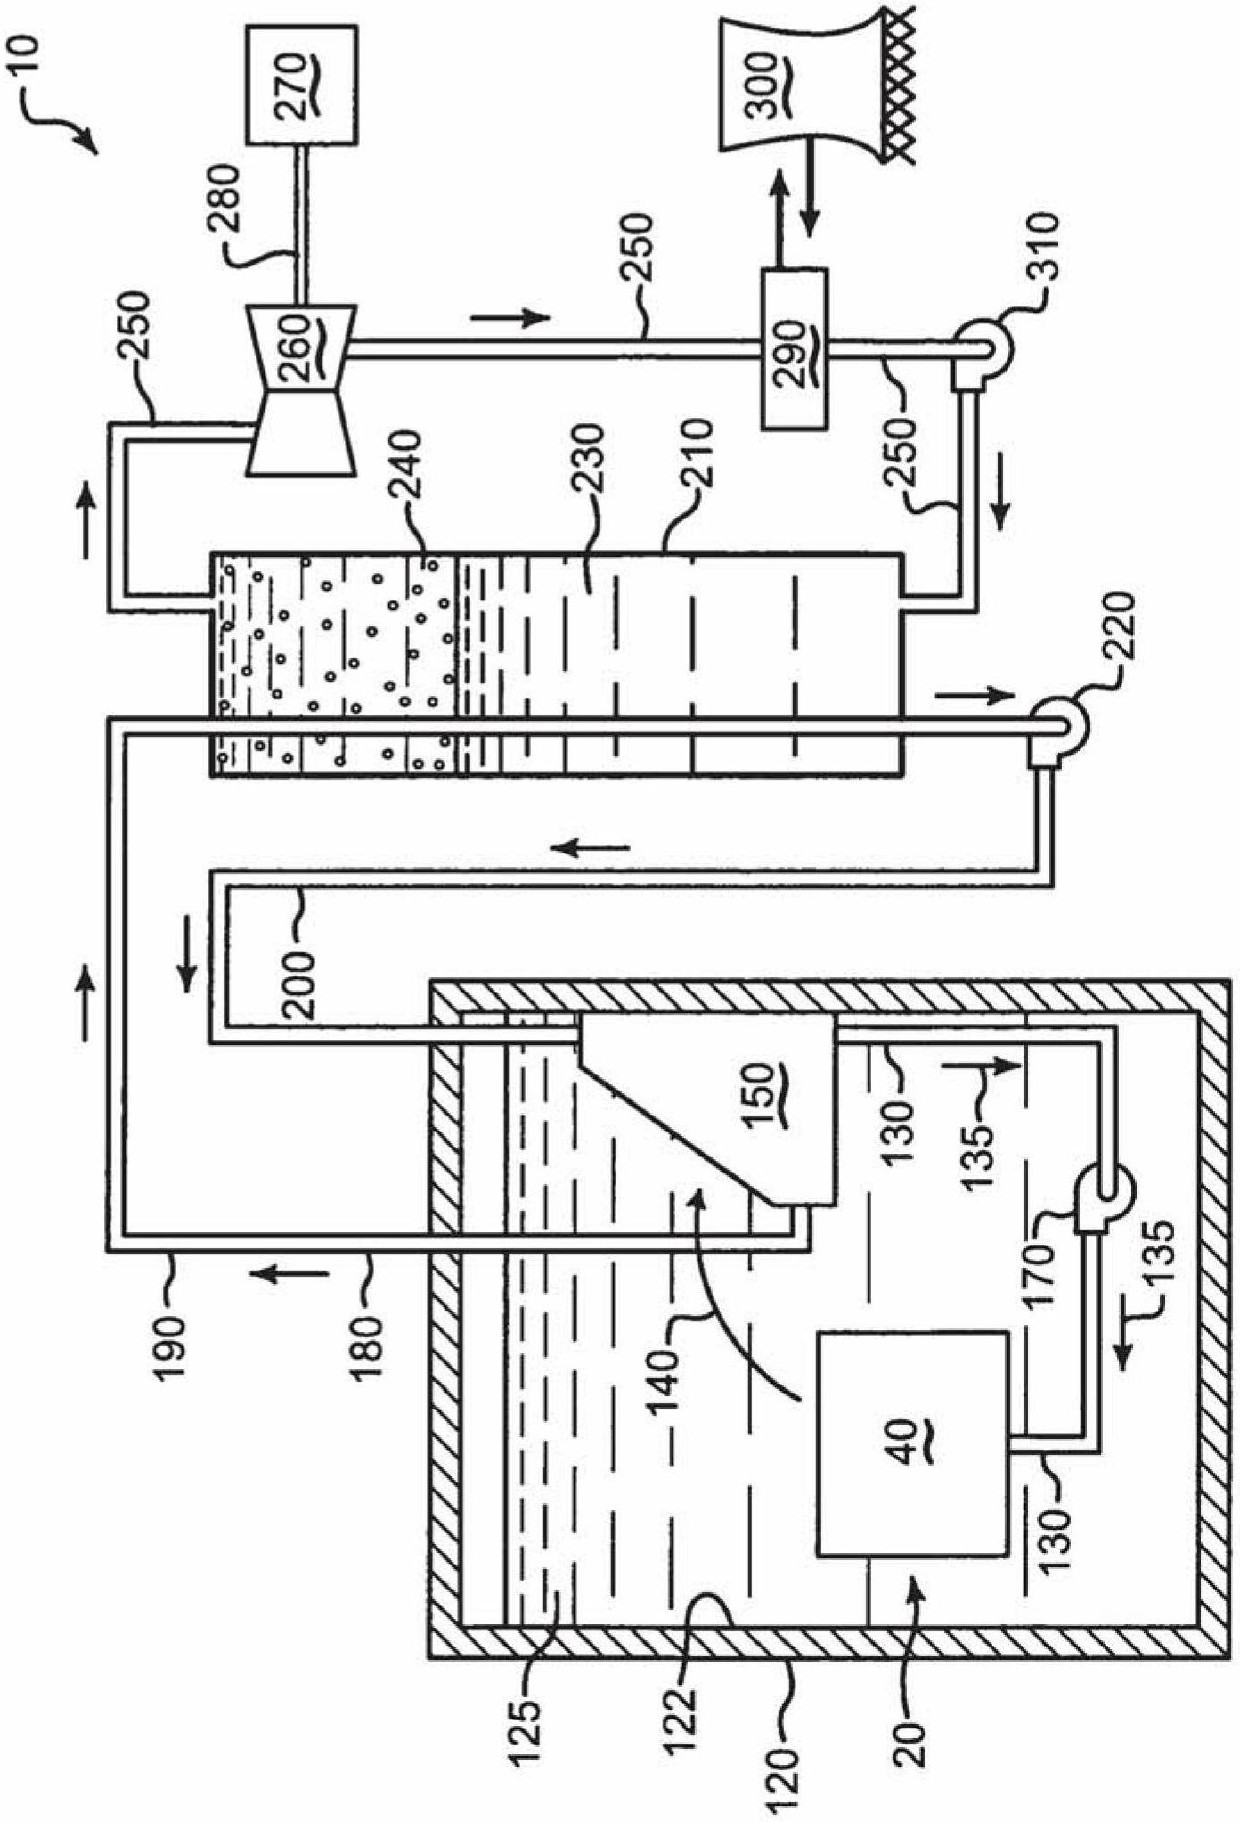 A heat exchanger, methods therefor and a nuclear fission reactor system